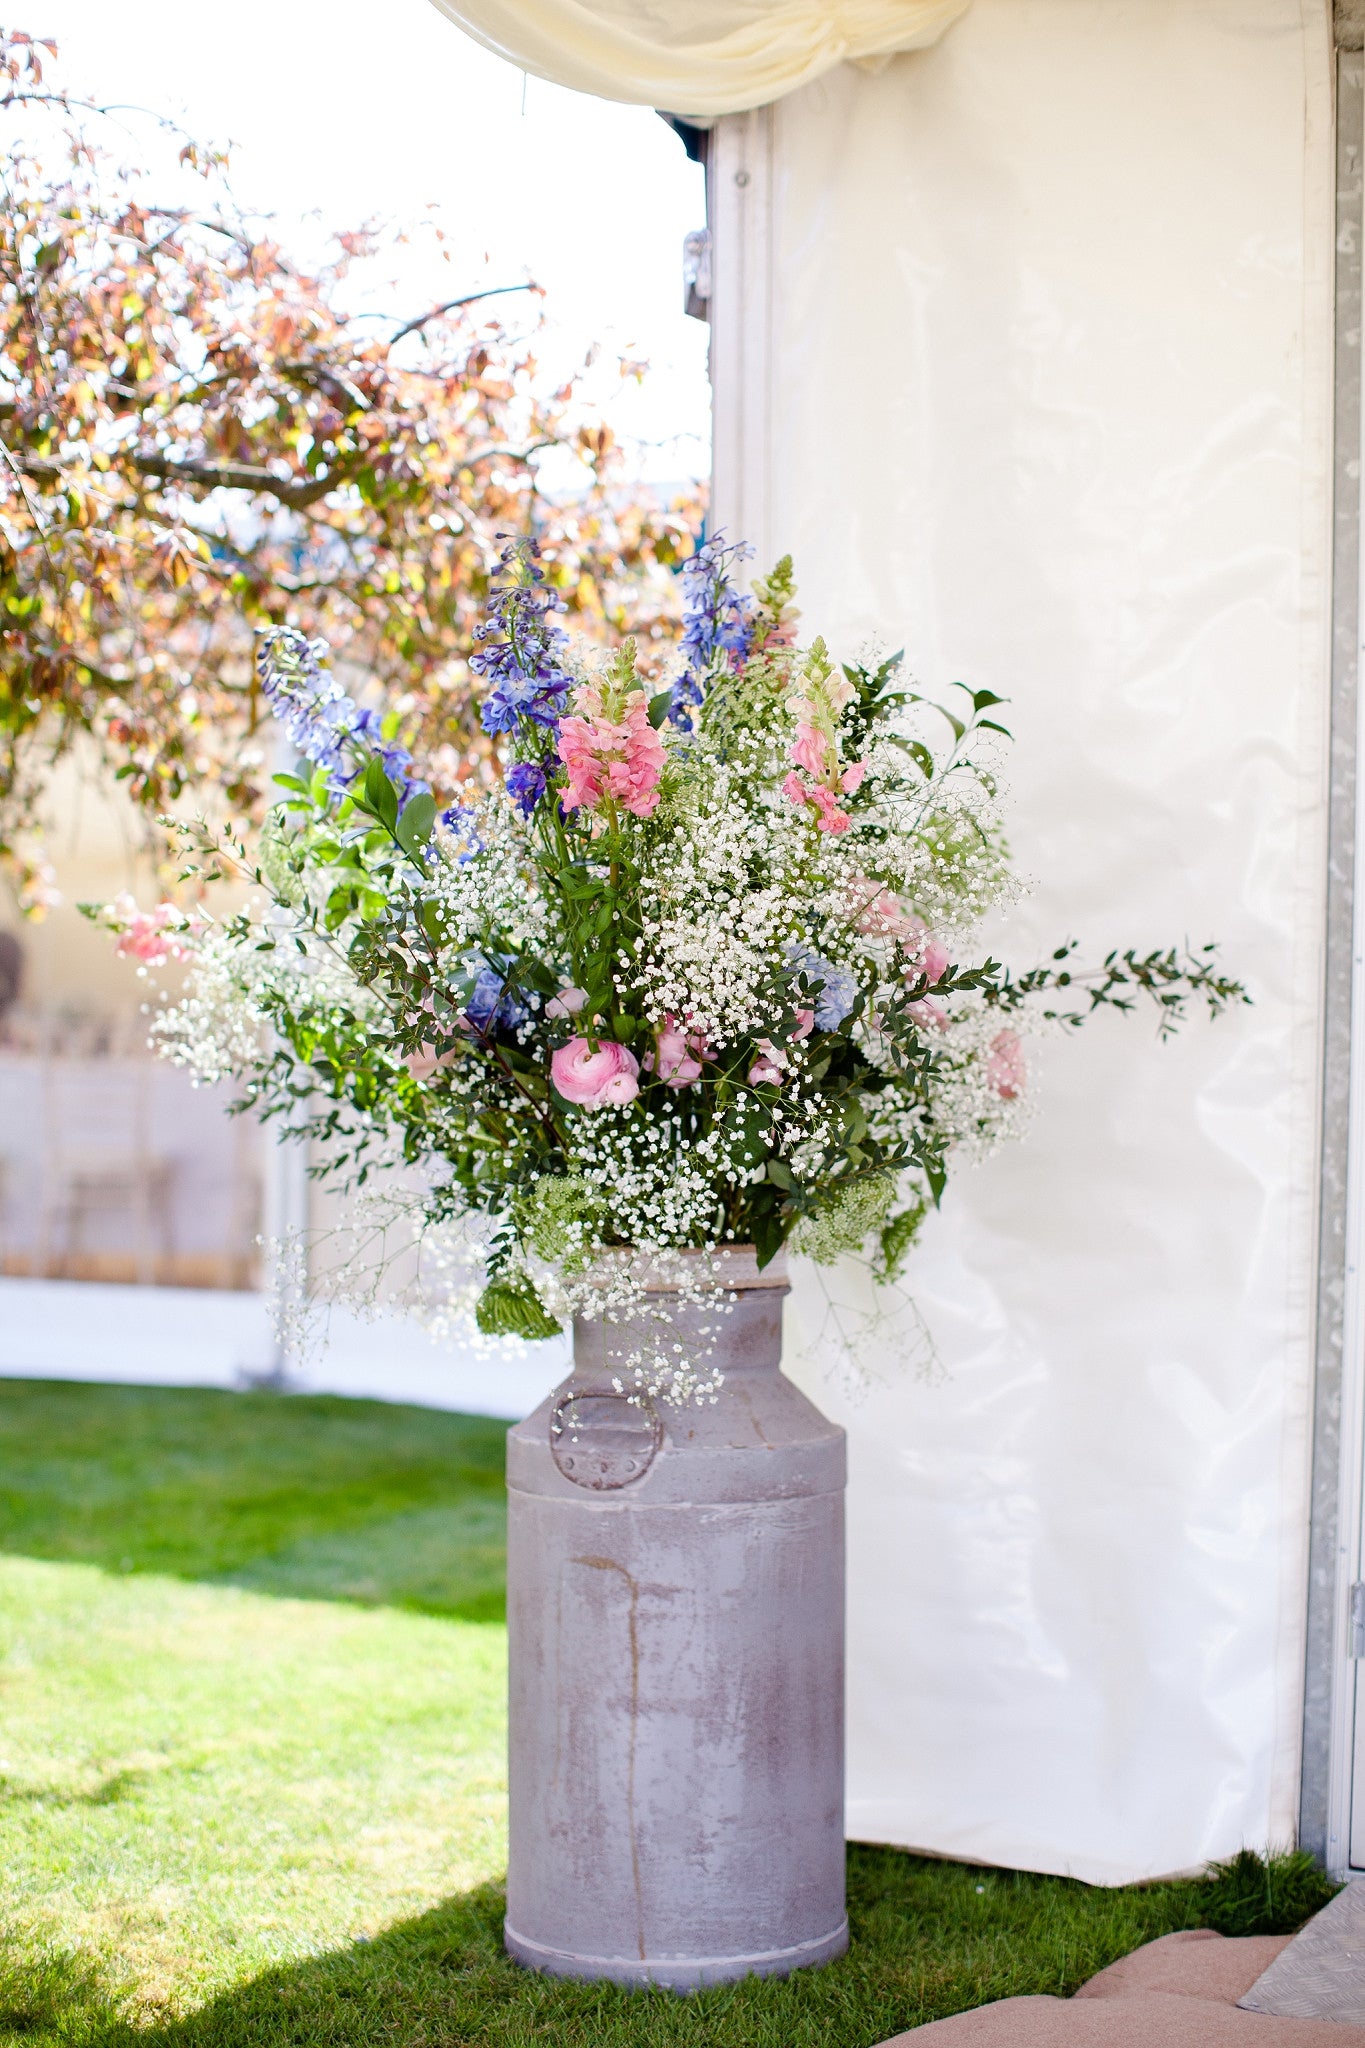 Milk churn based wedding floral arrangement with Gypsophila and flowers in shades of blue and pink.